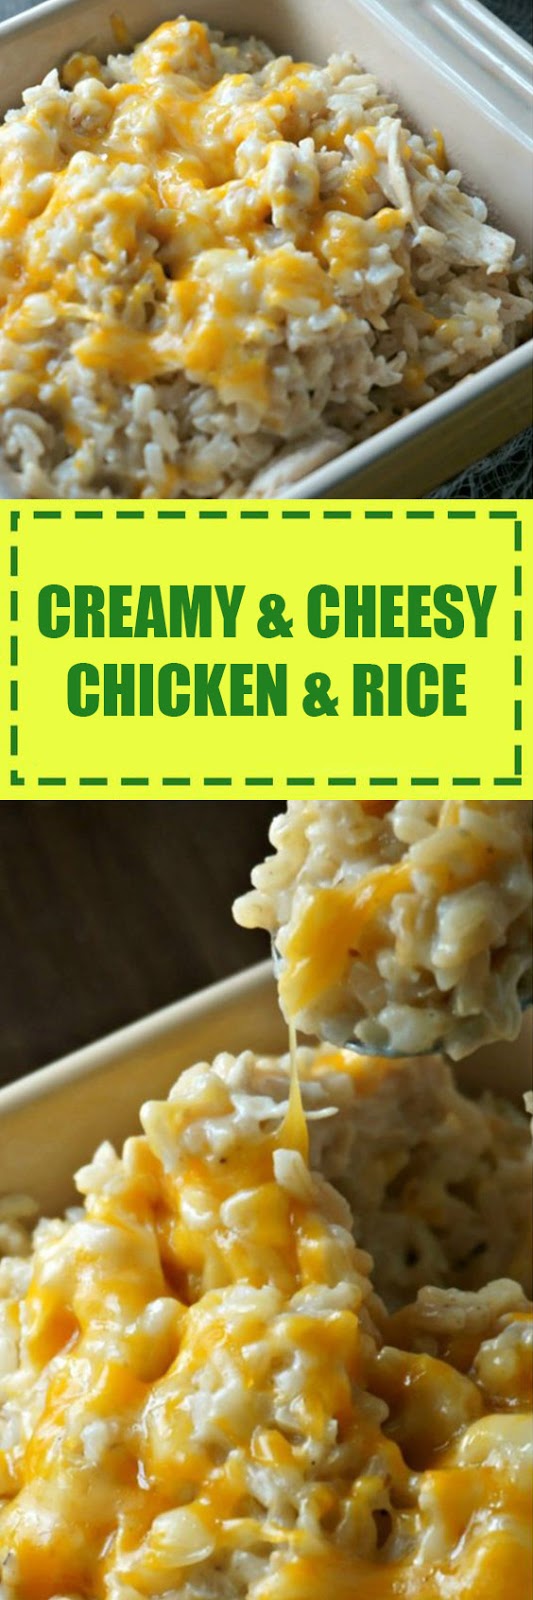 Creamy and Cheesy Chicken and Rice